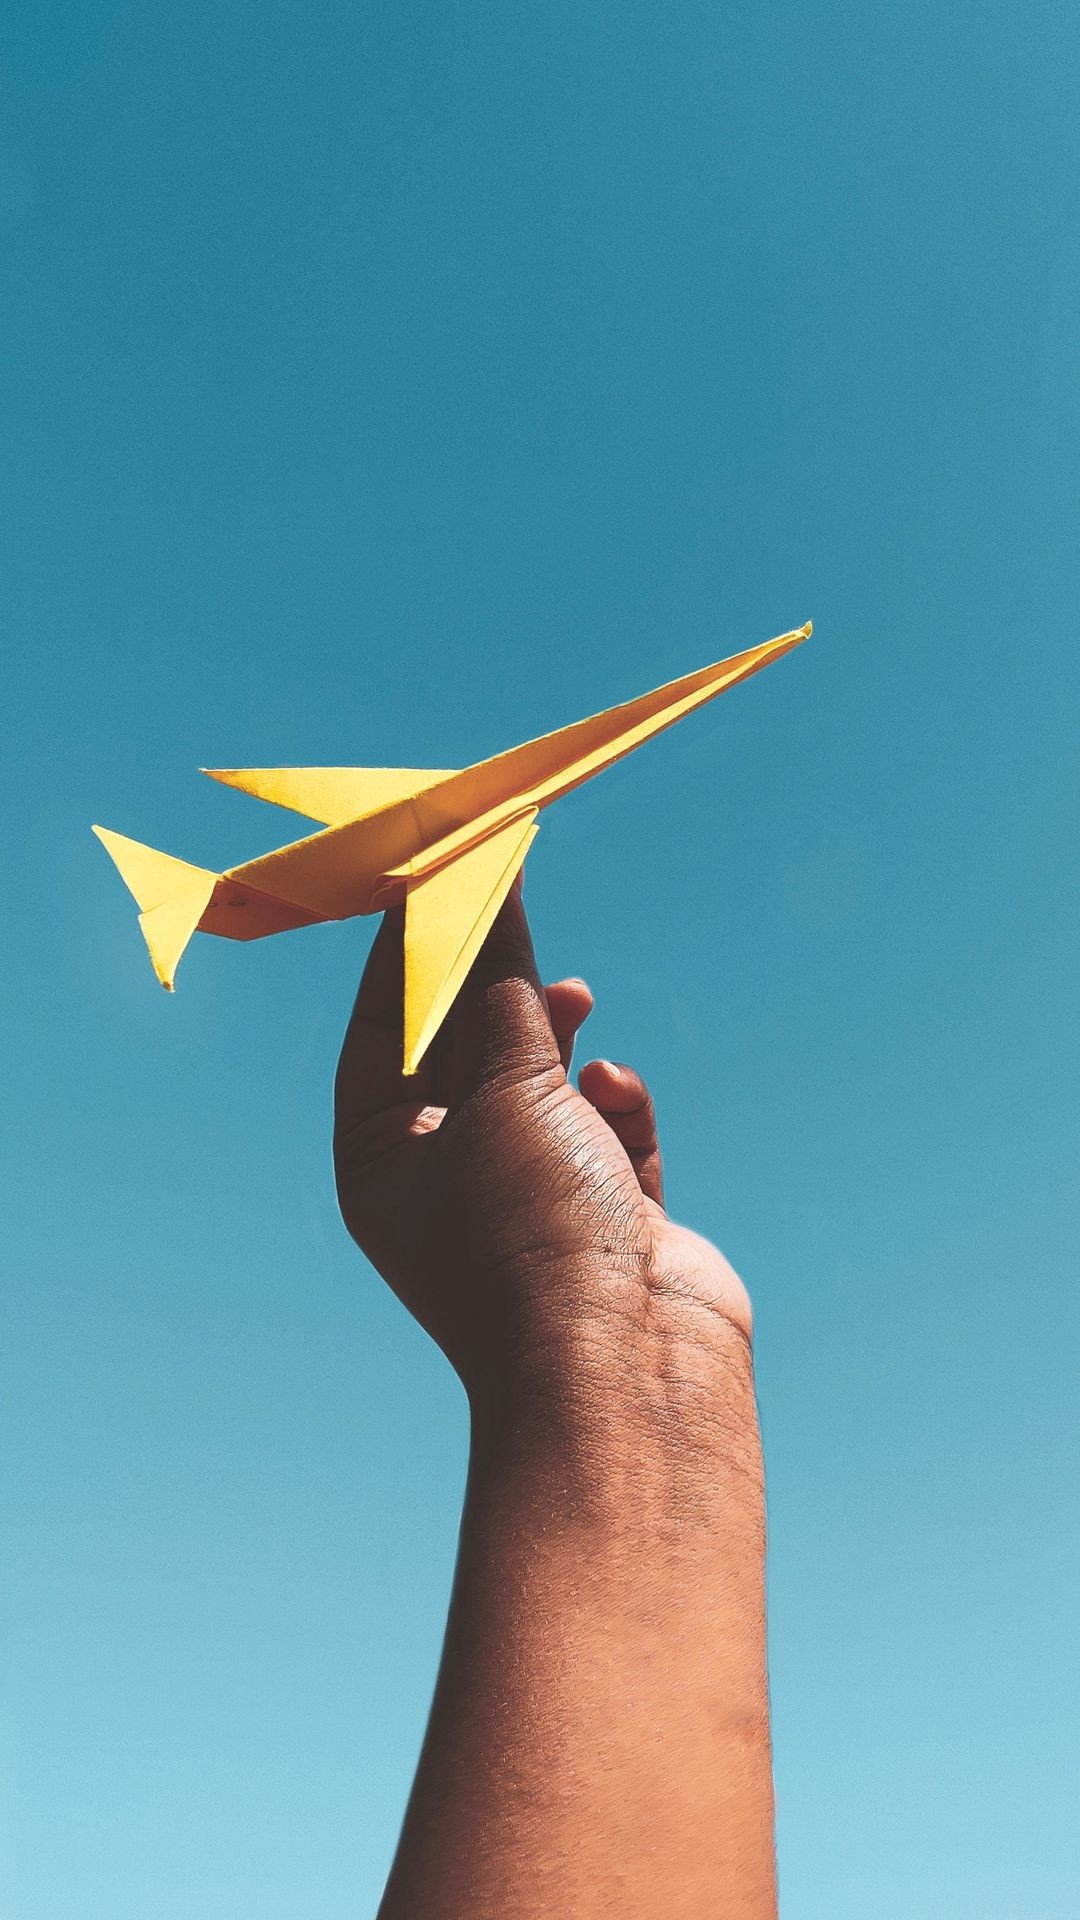 paper airplane represents strategy optimization